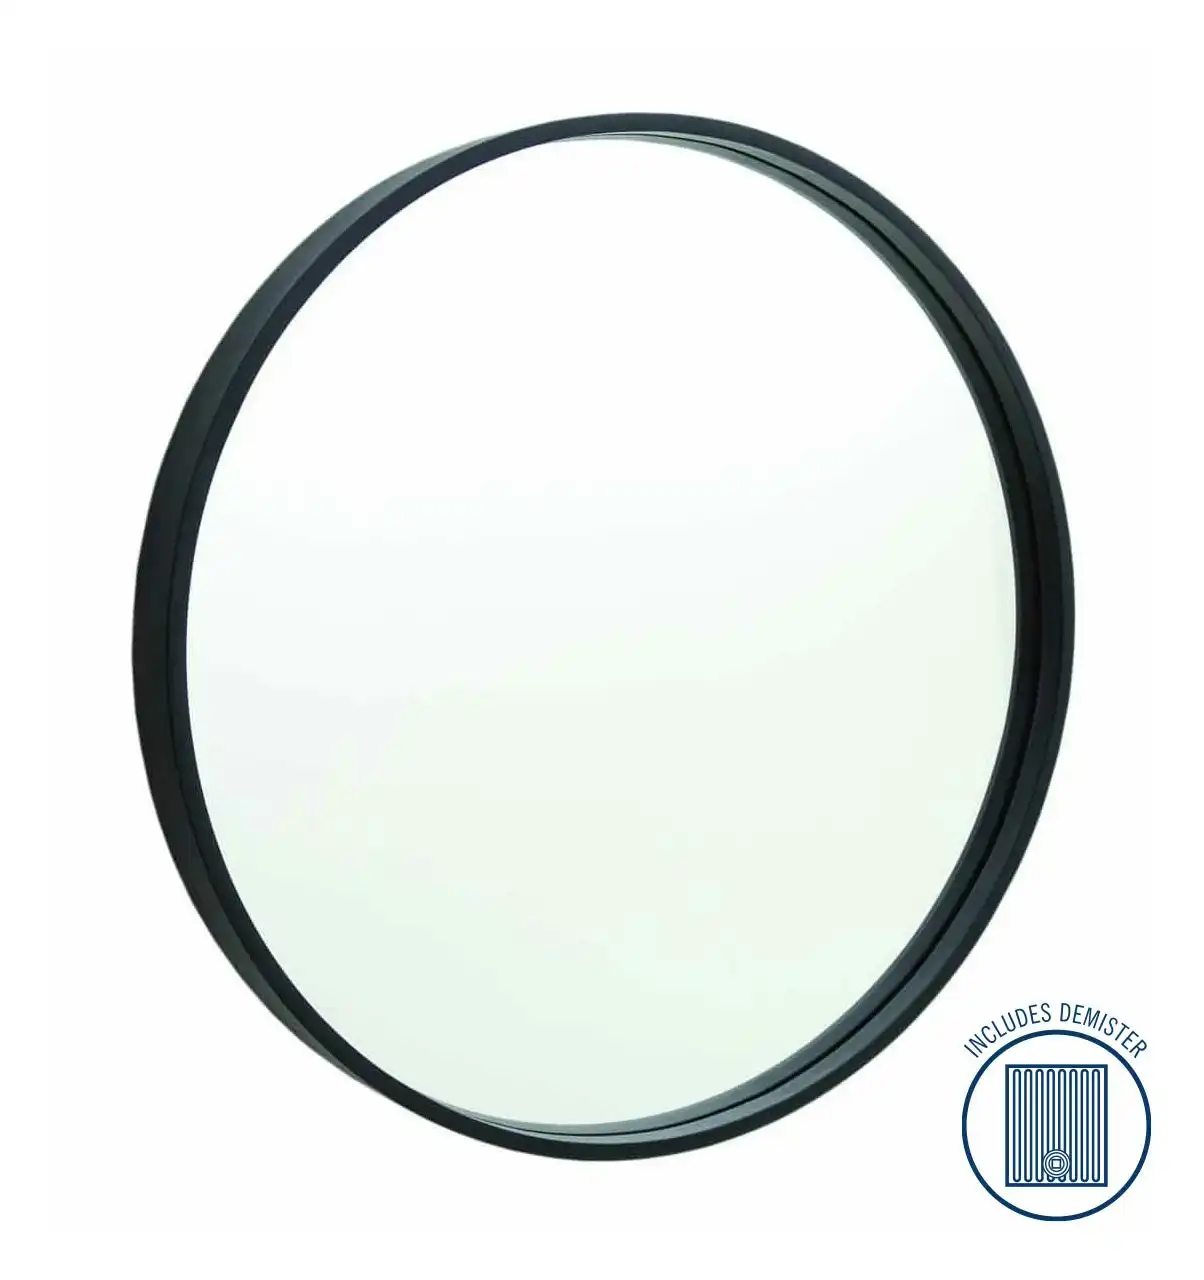 Thermogroup Contractor 900mm Diameter Round Black Frame Mirror with Demister BMR90BFD